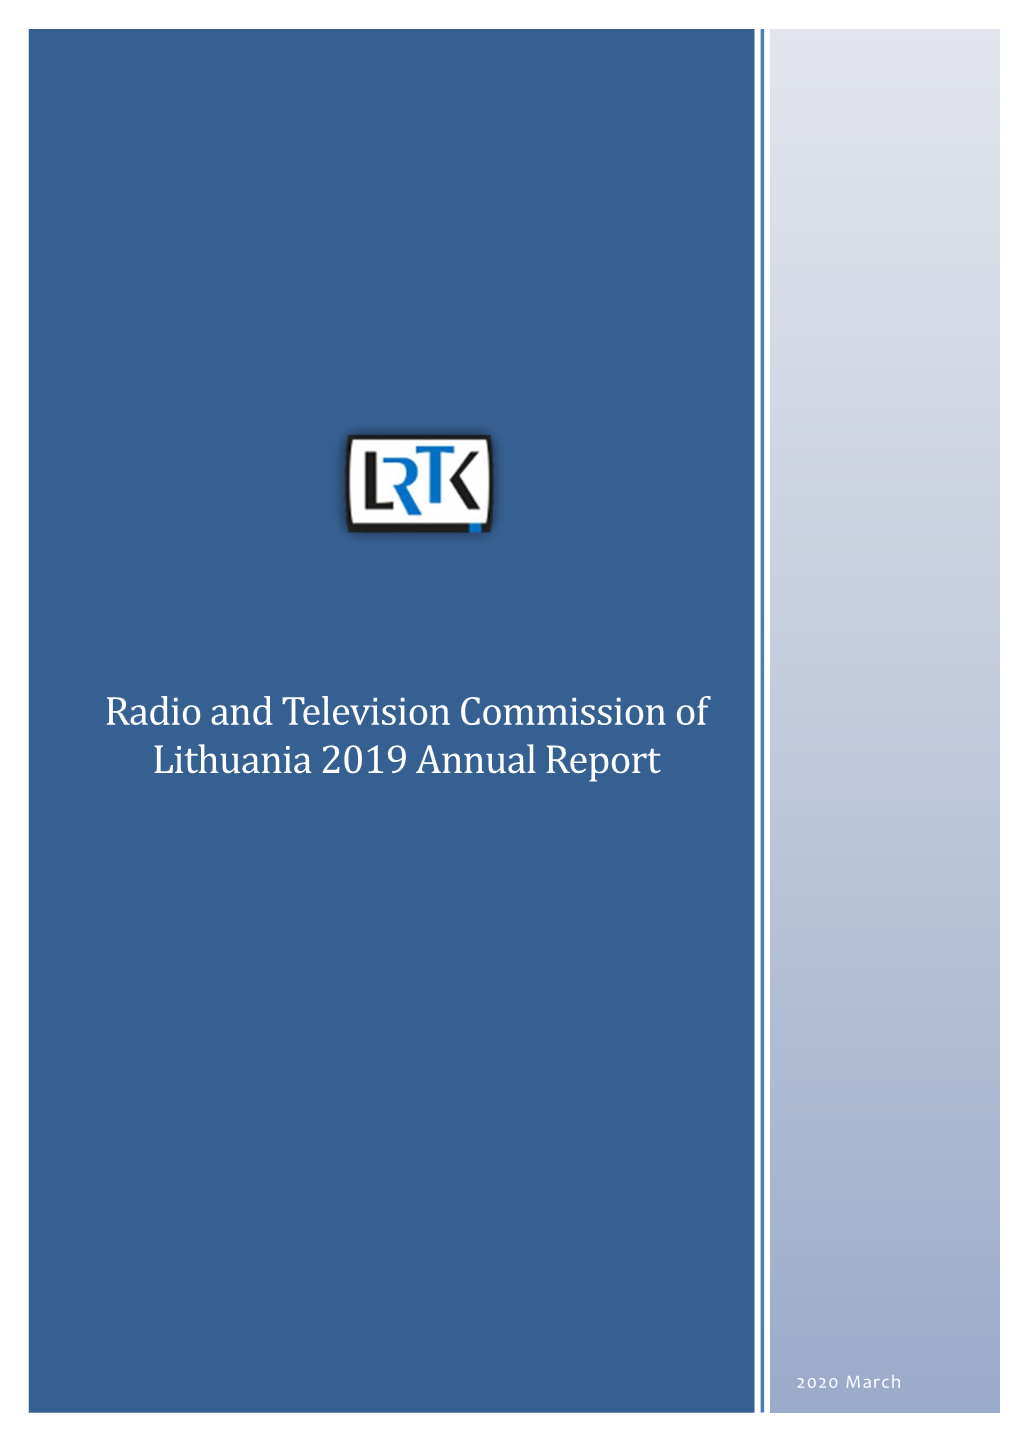 Radio and Television Commission of Lithuania 2019 Annual Report